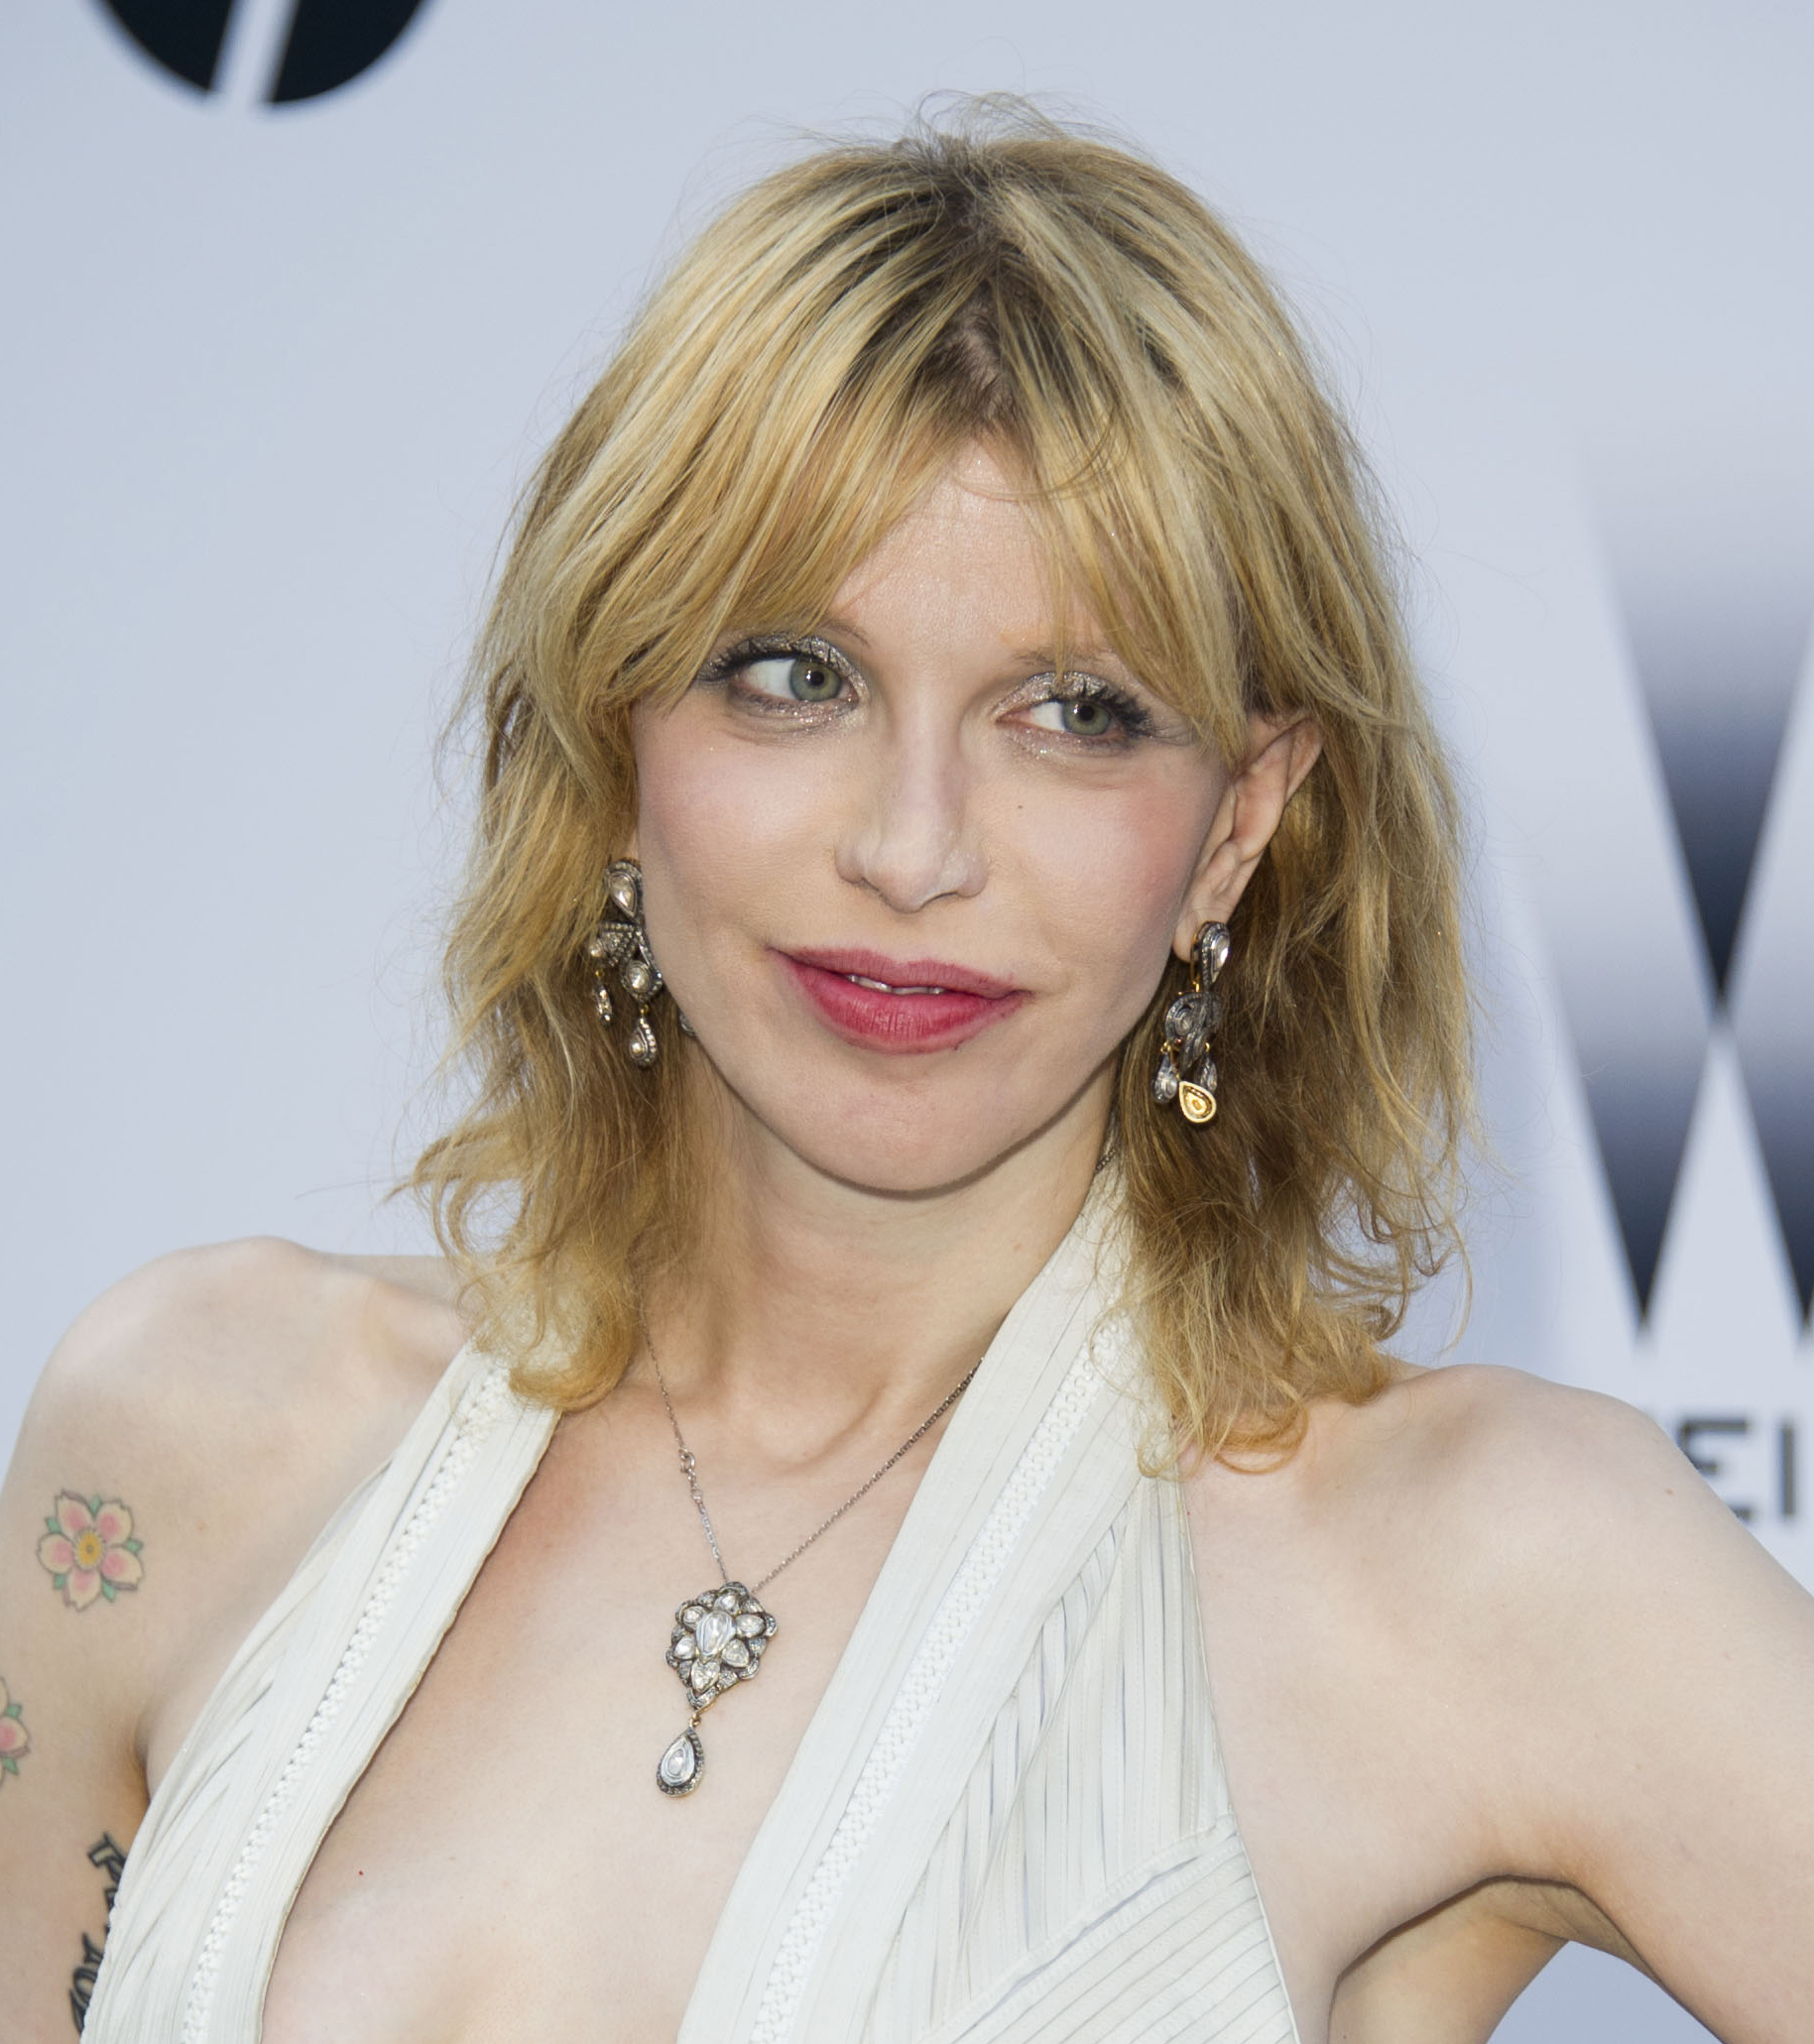 <p>During a 2013 interview with the Canadian magazine Fashion, <a href="https://www.wonderwall.com/celebrity/profiles/overview/courtney-love-806.article">Courtney Love</a> (pictured in 2011) reportedly admitted that she got a face lift in the late '90s. "Nobody ask me about aging gracefully, pleeease," she said. "C'mom, I took advice from Goldie Hawn when she said I should get a facelift at 35!" (The Hole frontwoman would've been 35 in 1999.) In 2014, she admitted she got her "nose fixed" when she was 20. "I was an actress in the '80s but, well, let's just be real, I had a really big nose," she said. "That schnoz was not taking me anywhere but radio. ... I got my nose fixed ... [and] in six months, the whole world changed."</p>